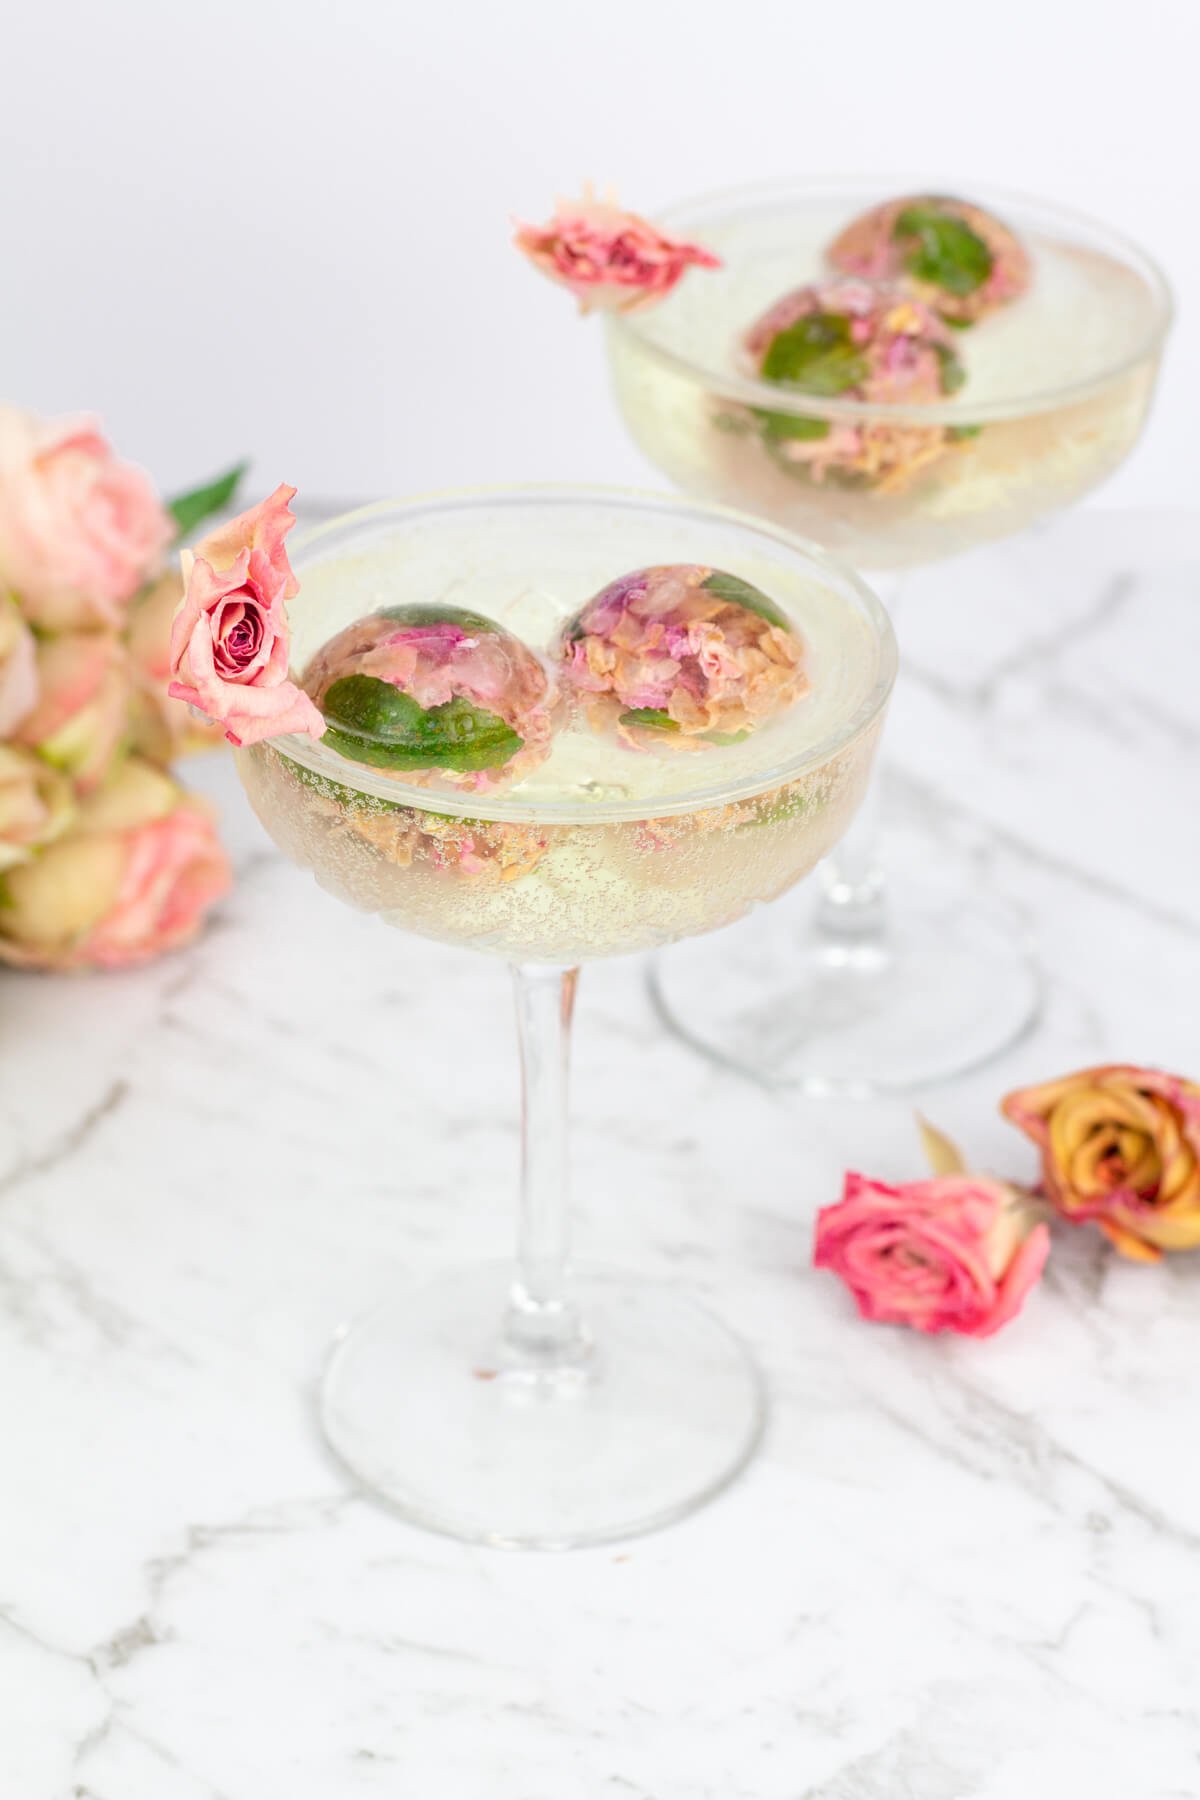 champagne coupe glass with round frozen spheres with rose petals and mint inside garnished with a dried rose.